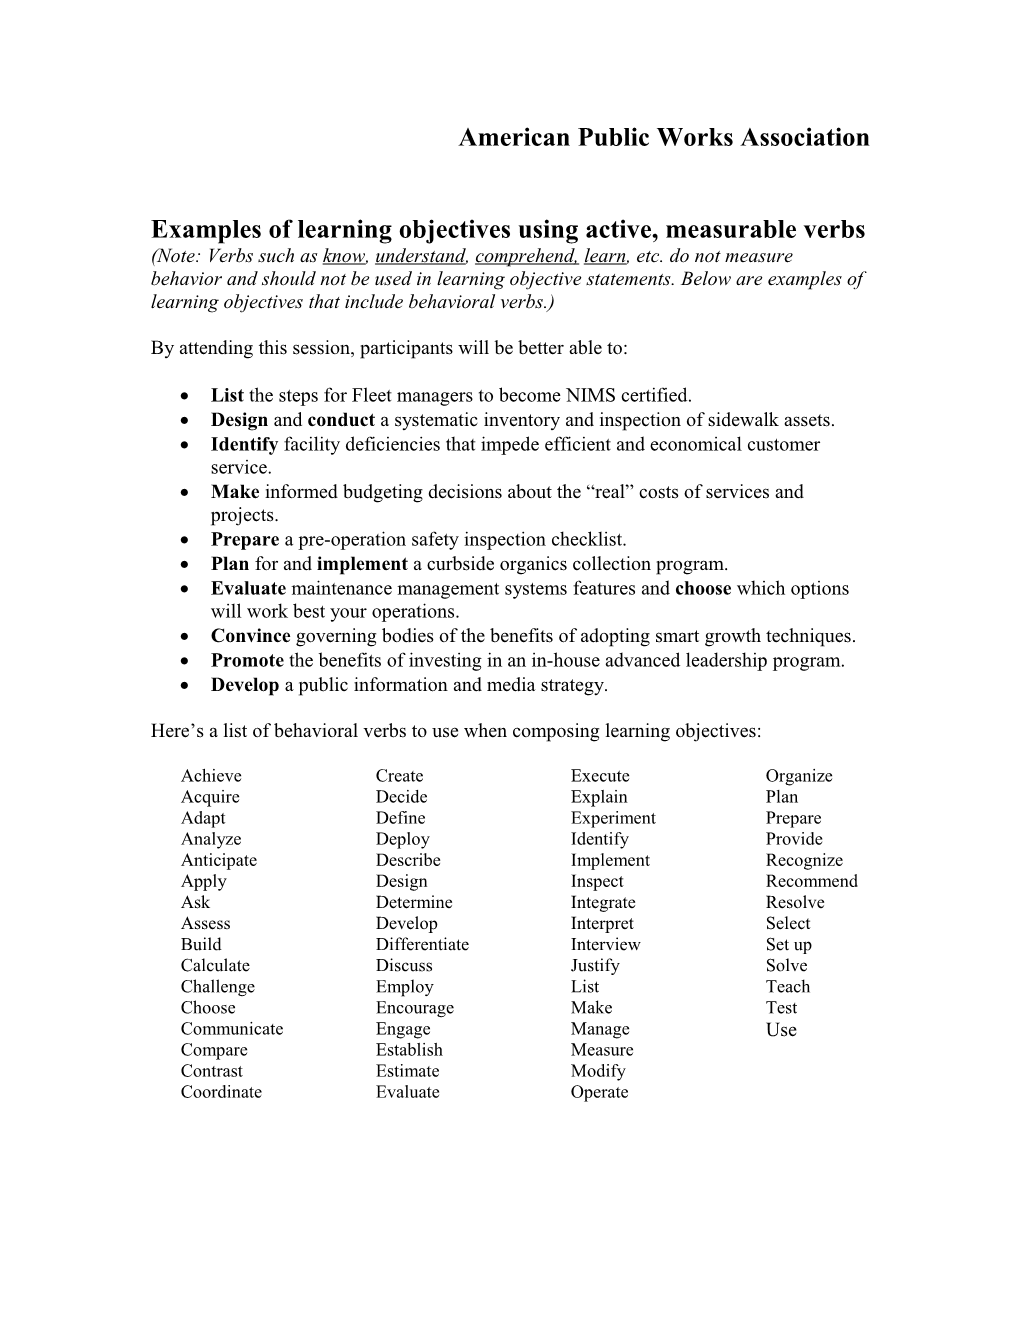 Examples of Learning Objectives Using Behavioral Verbs